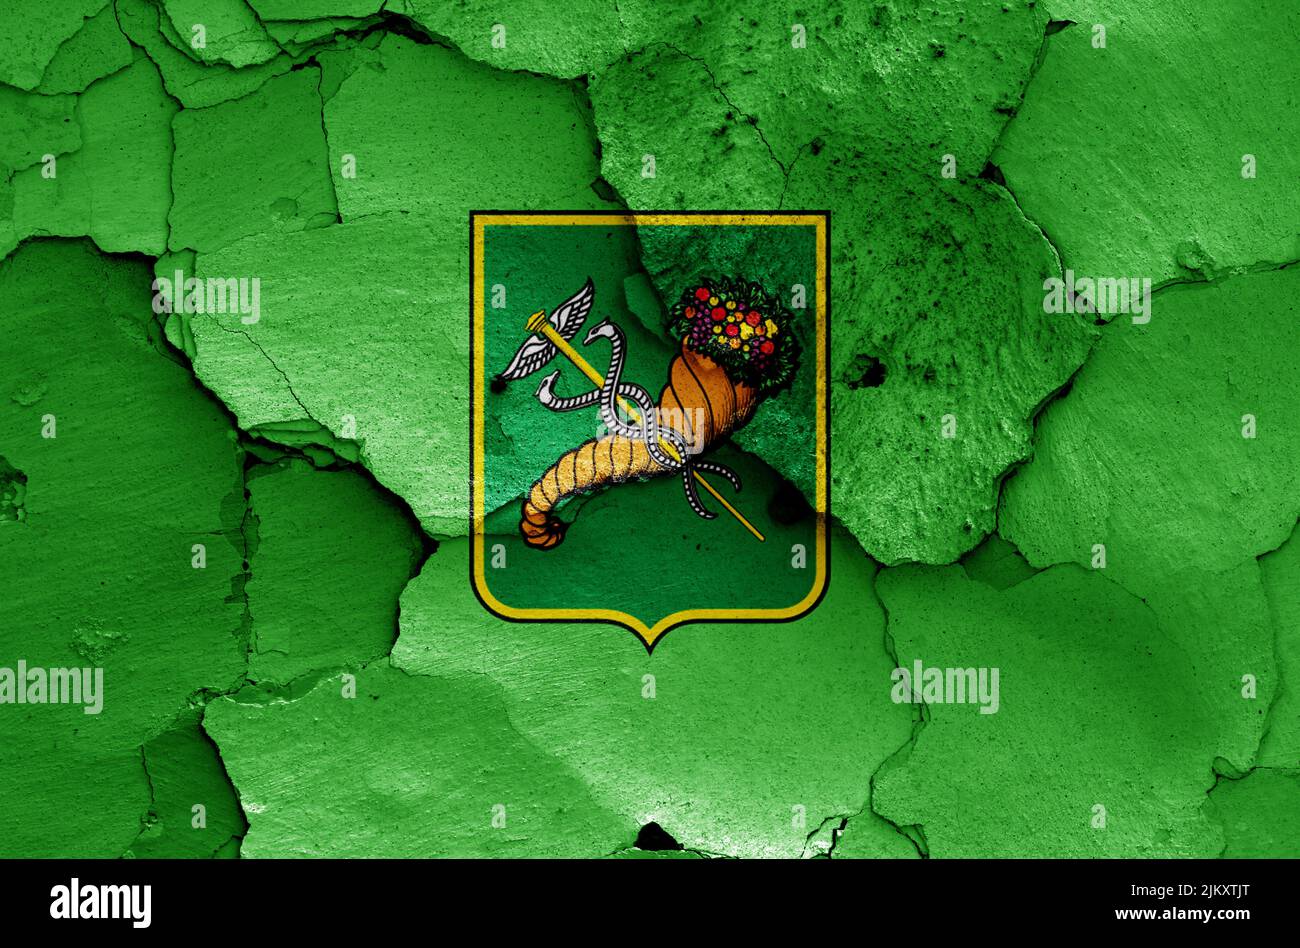 flag of Kharkiv painted on cracked wall Stock Photo